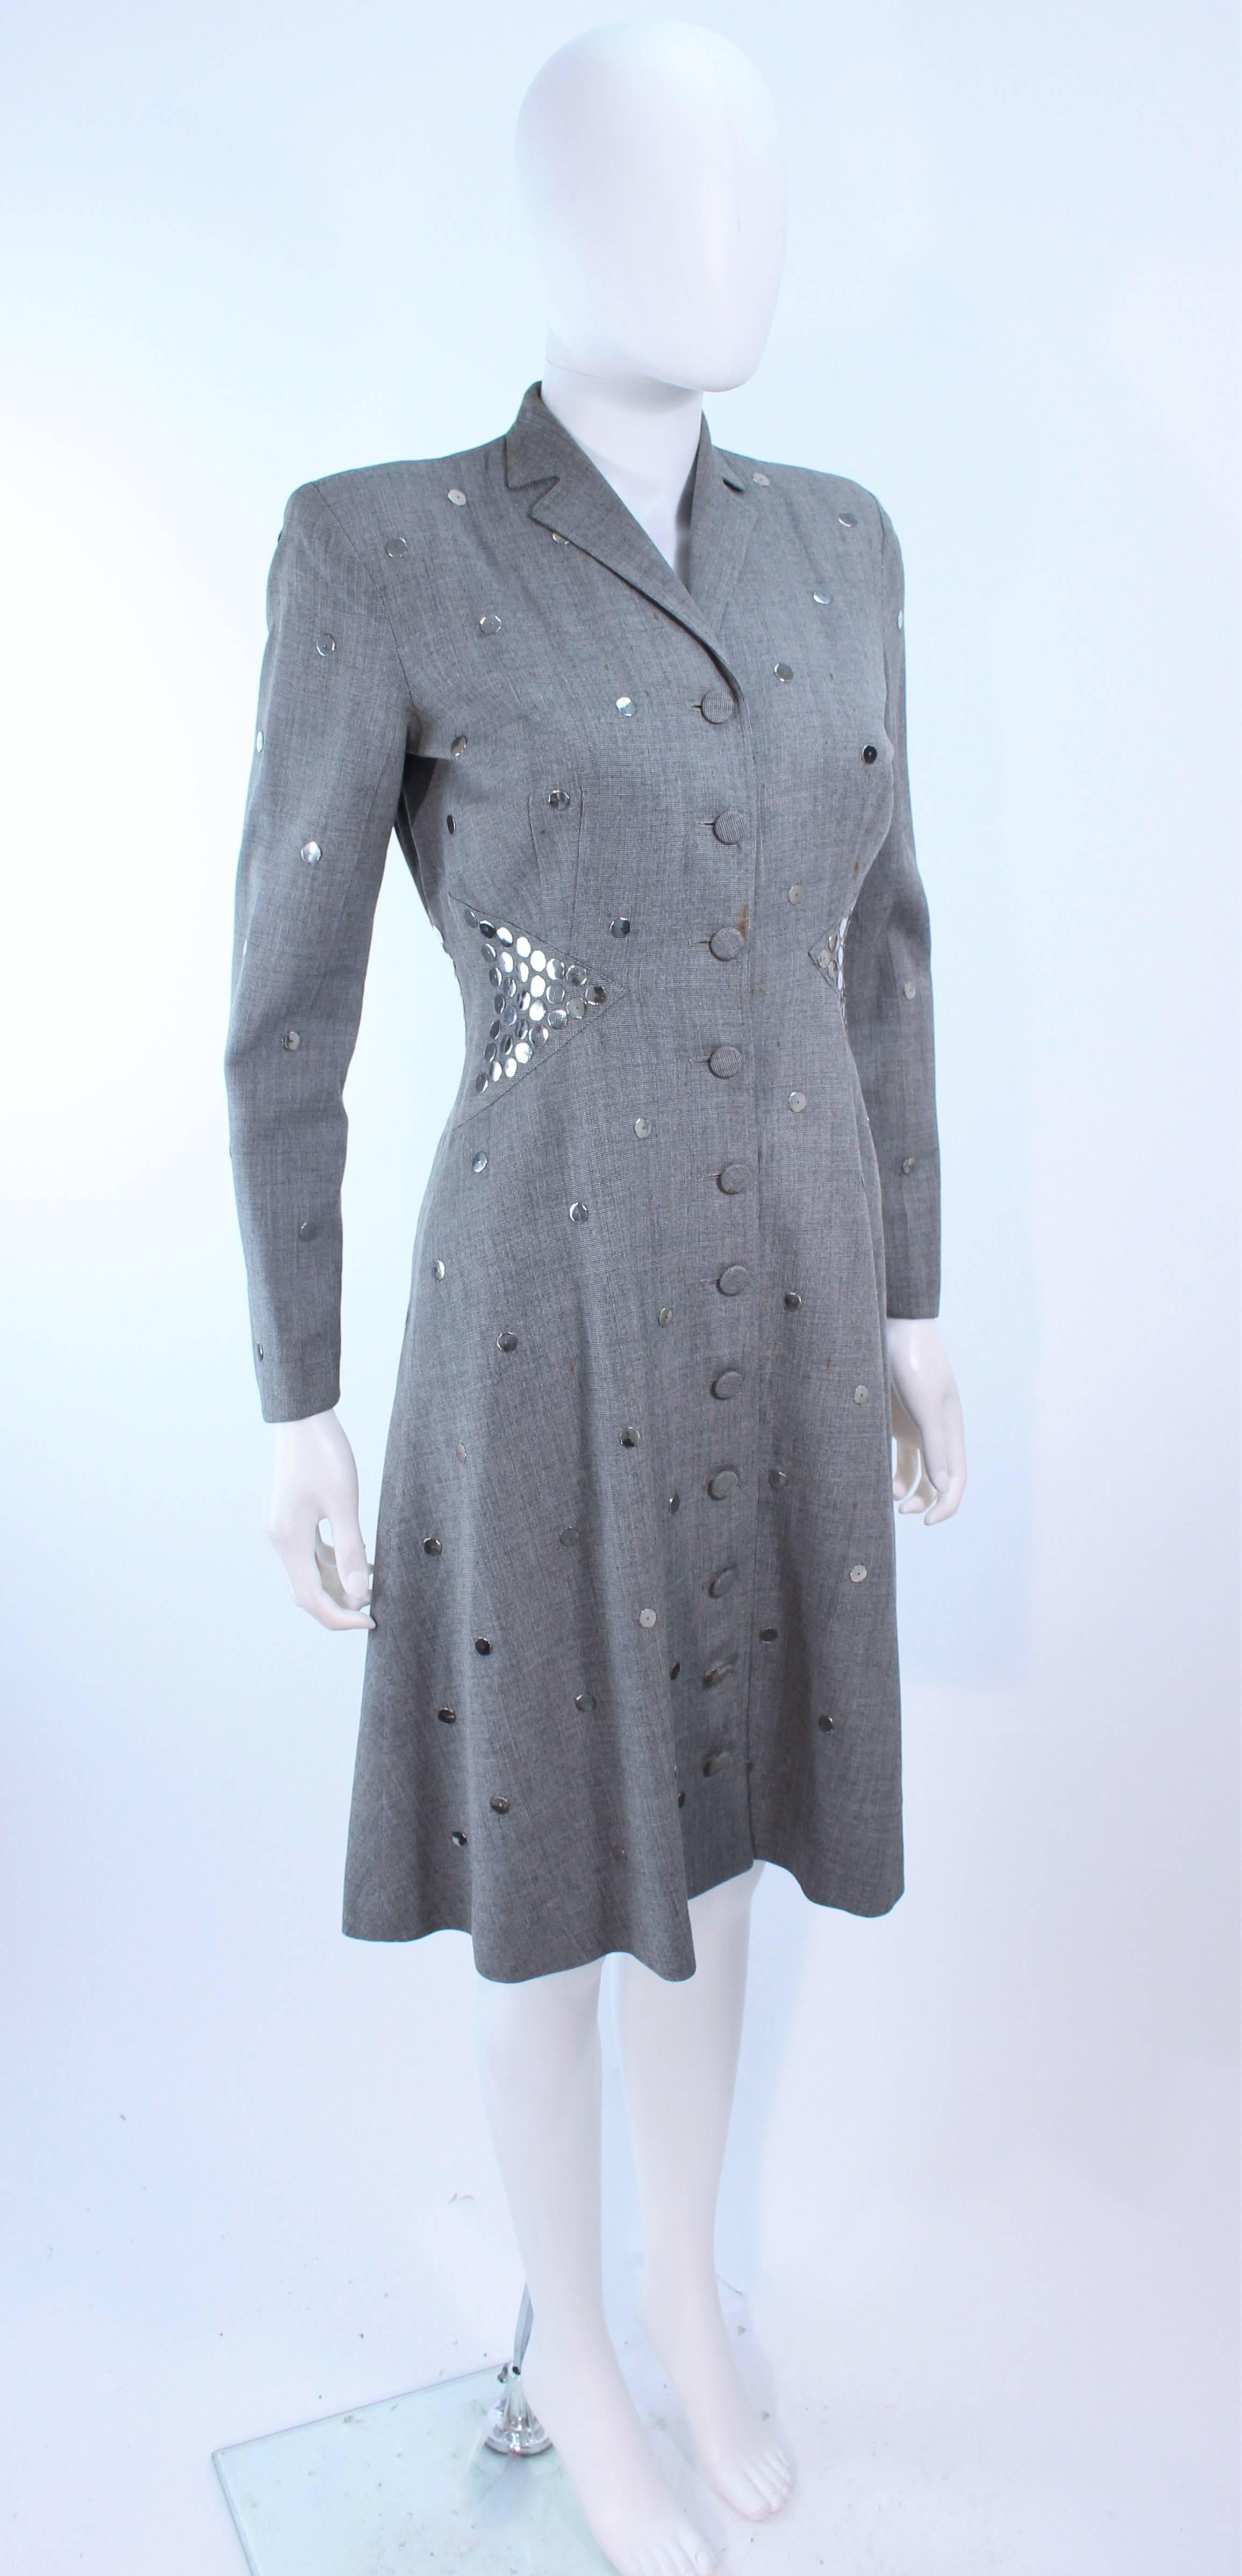 KAY COLLIER Grey Wool Coat Dress with Sequin Applique Size 2 4 In Excellent Condition For Sale In Los Angeles, CA